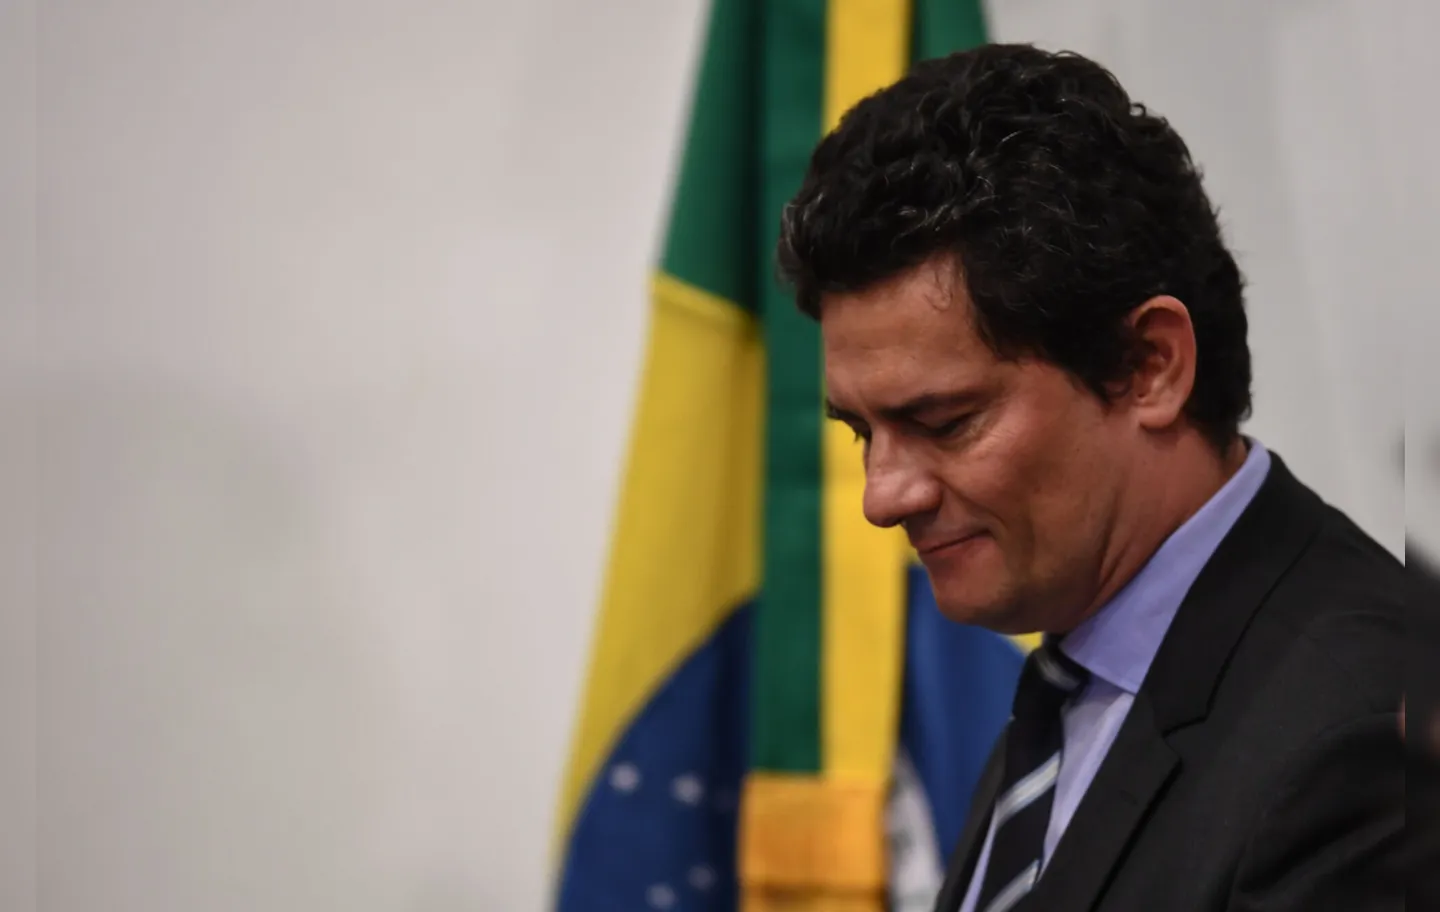 Brazilian Minister of Justice and Public Security, Sergio Moro, leaves after delivering during a press conference at Minister of Justice, in Brasilia, on April 24, 2020. - Brazilian Minister of Justice and Public Security, Sergio Moro, announce his resignation on Friday after Brazilian President Jair Bolsonaro dismissed the head of the Brazilian Federal Police, according to sources close to the popular former anti-corruption judge. (Photo by EVARISTO SA / AFP)